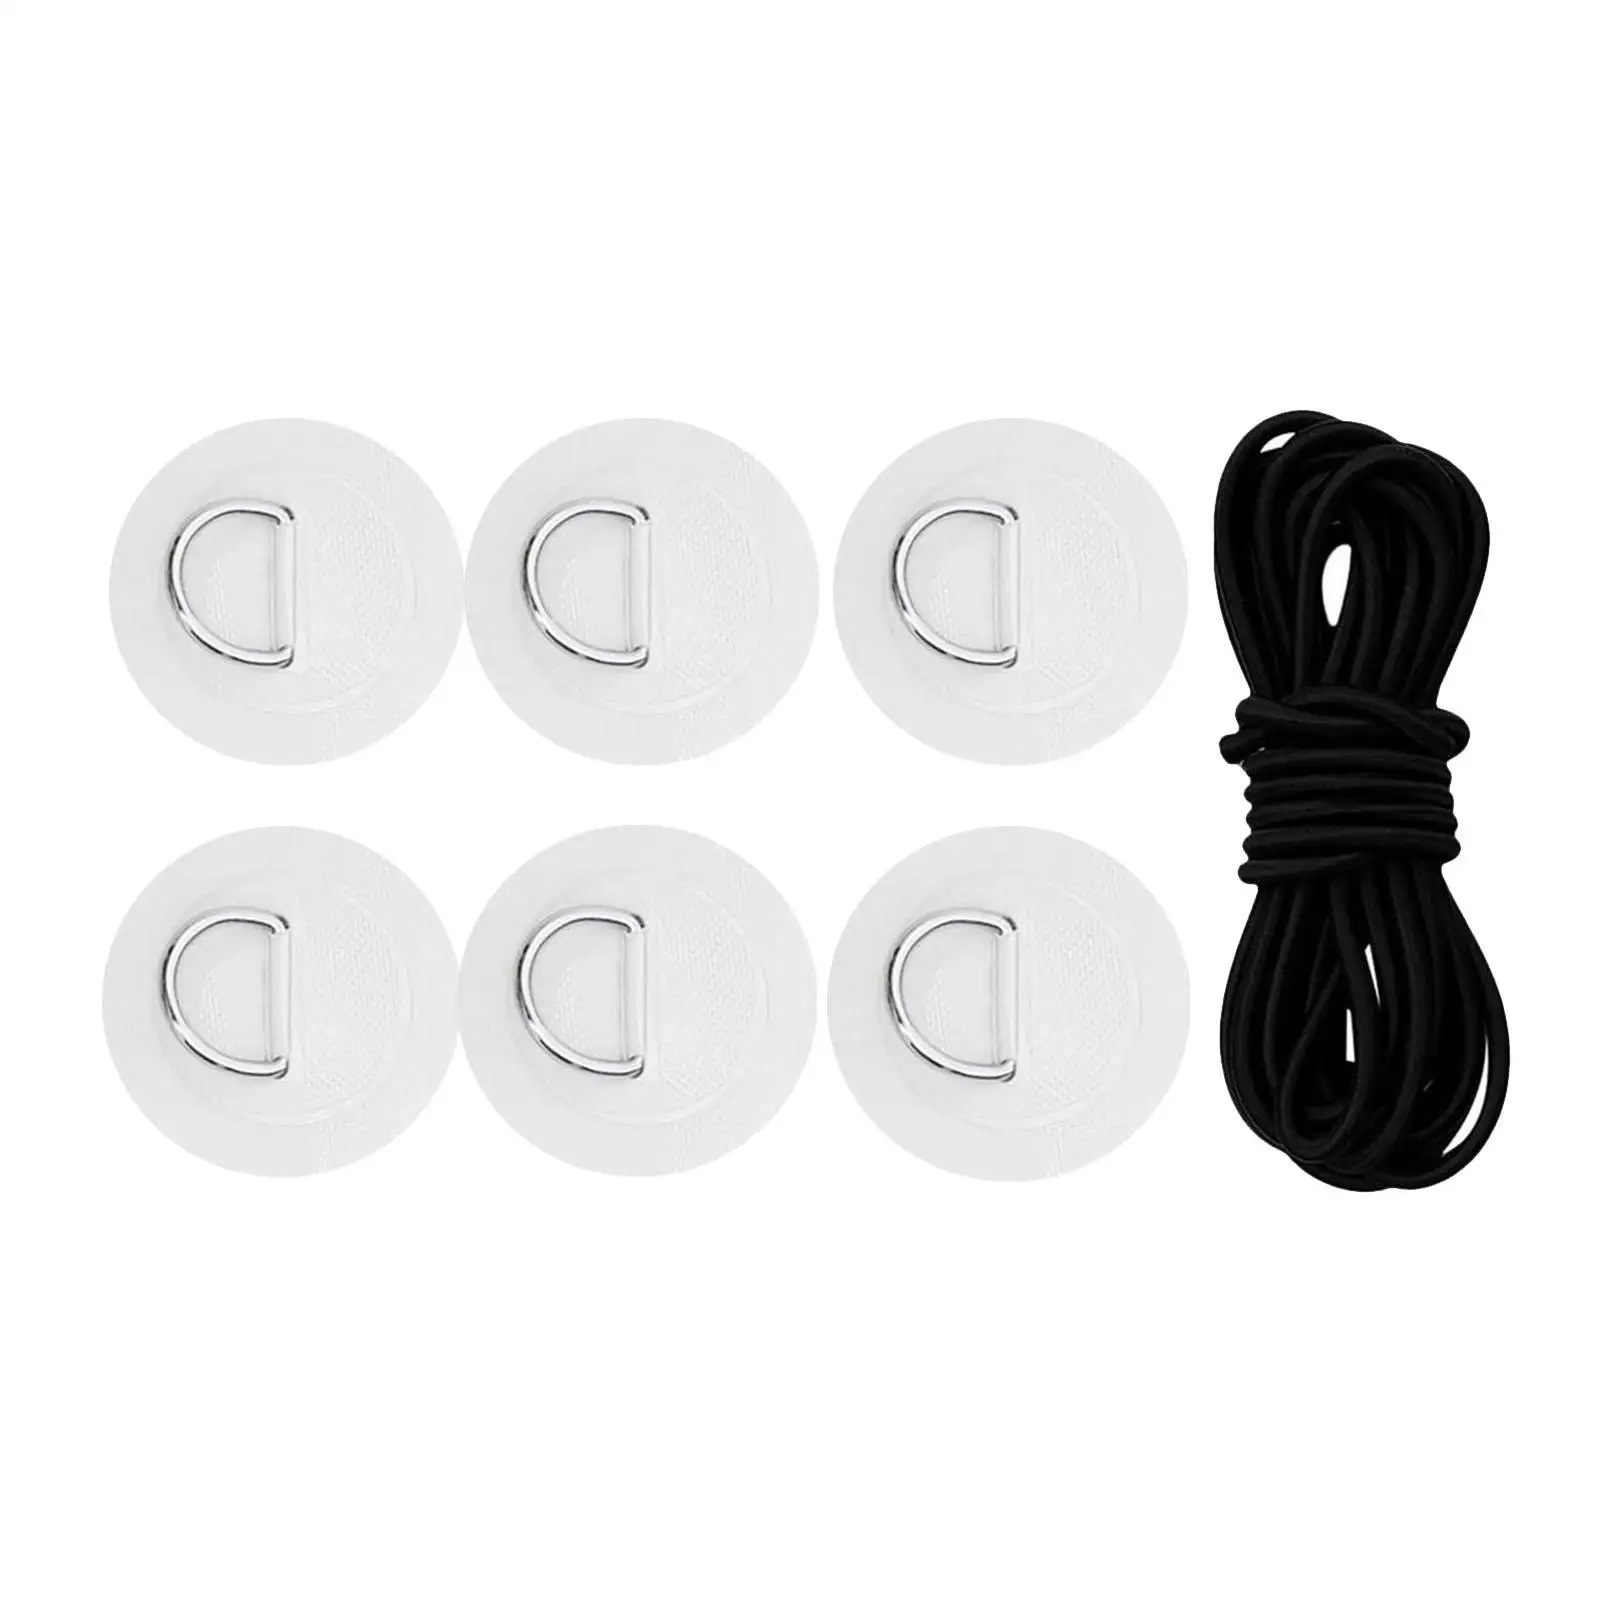 6x D Rings PVC Patch Elastic Bungee Rope Deck Attachment Kit Deck Rigging Kit for Paddleboard Canoe Dinghy Raft Inflatable Boat